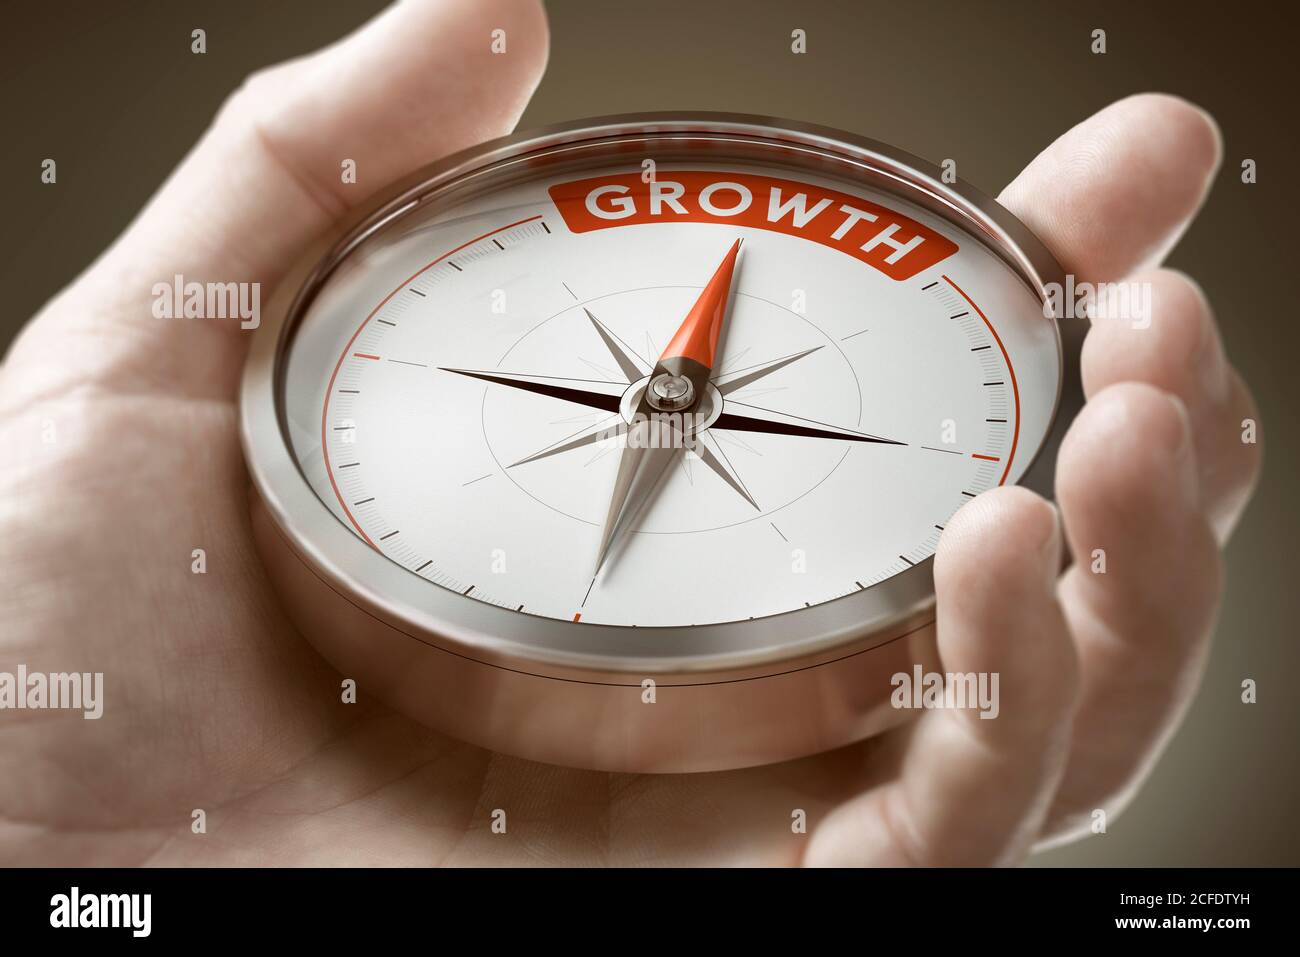 Man hand holding compass with needle pointing the word growth. Investment of financial concept. Composite image between a hand photography and a 3D ba Stock Photo